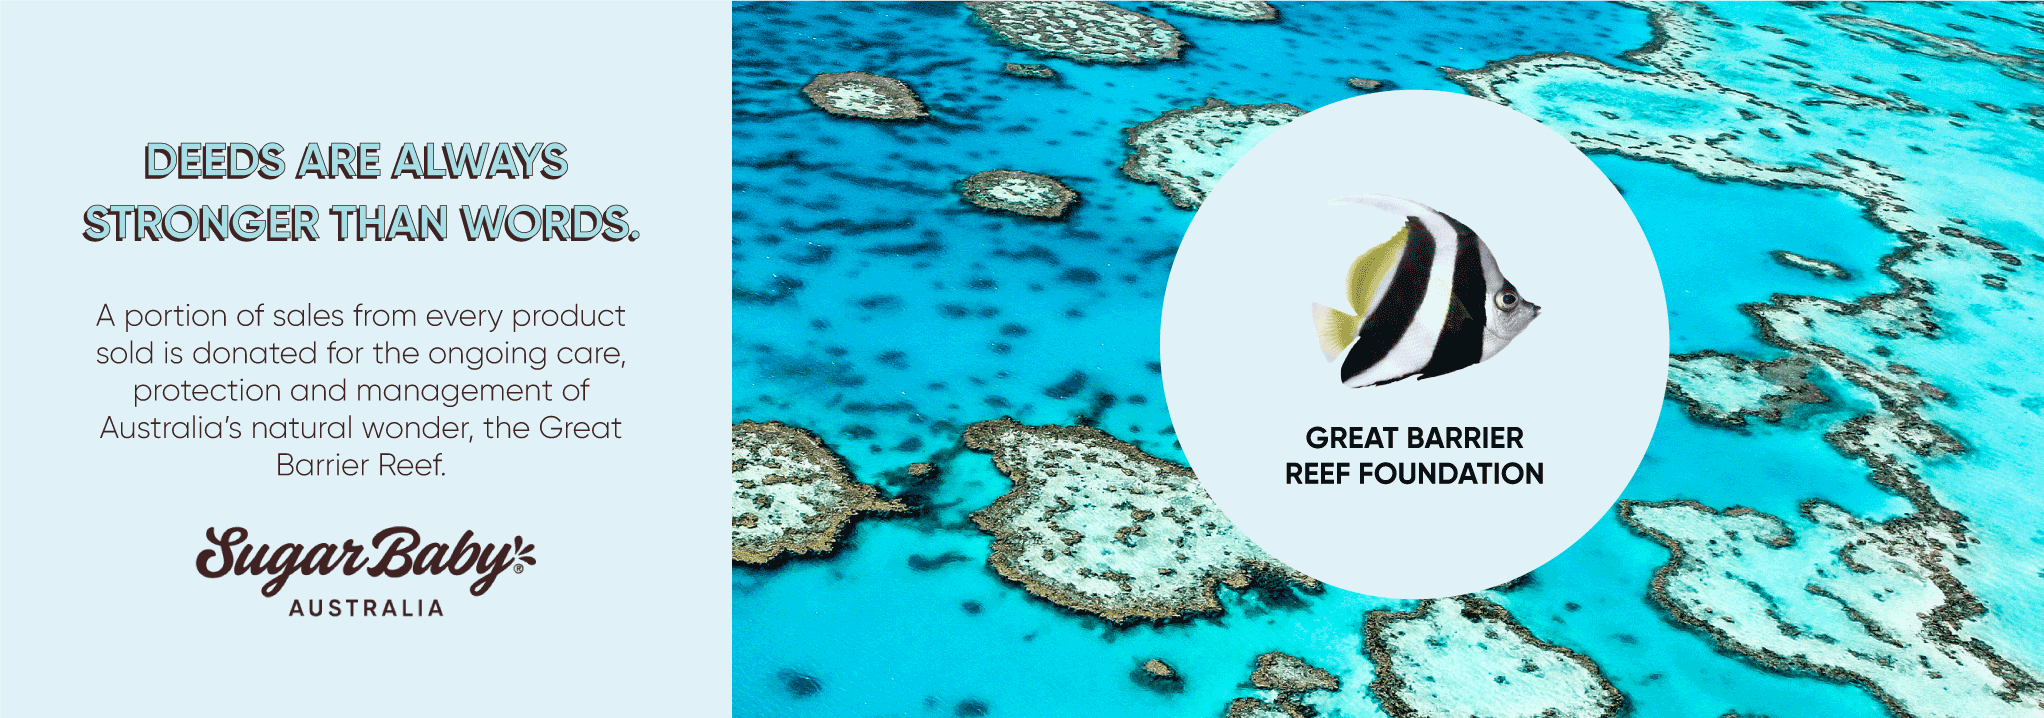 A portion of sales from every SugarBaby product sold is donated for ongoing care, protection and management of Australia's natural wonder, the Great Barrier Reef.